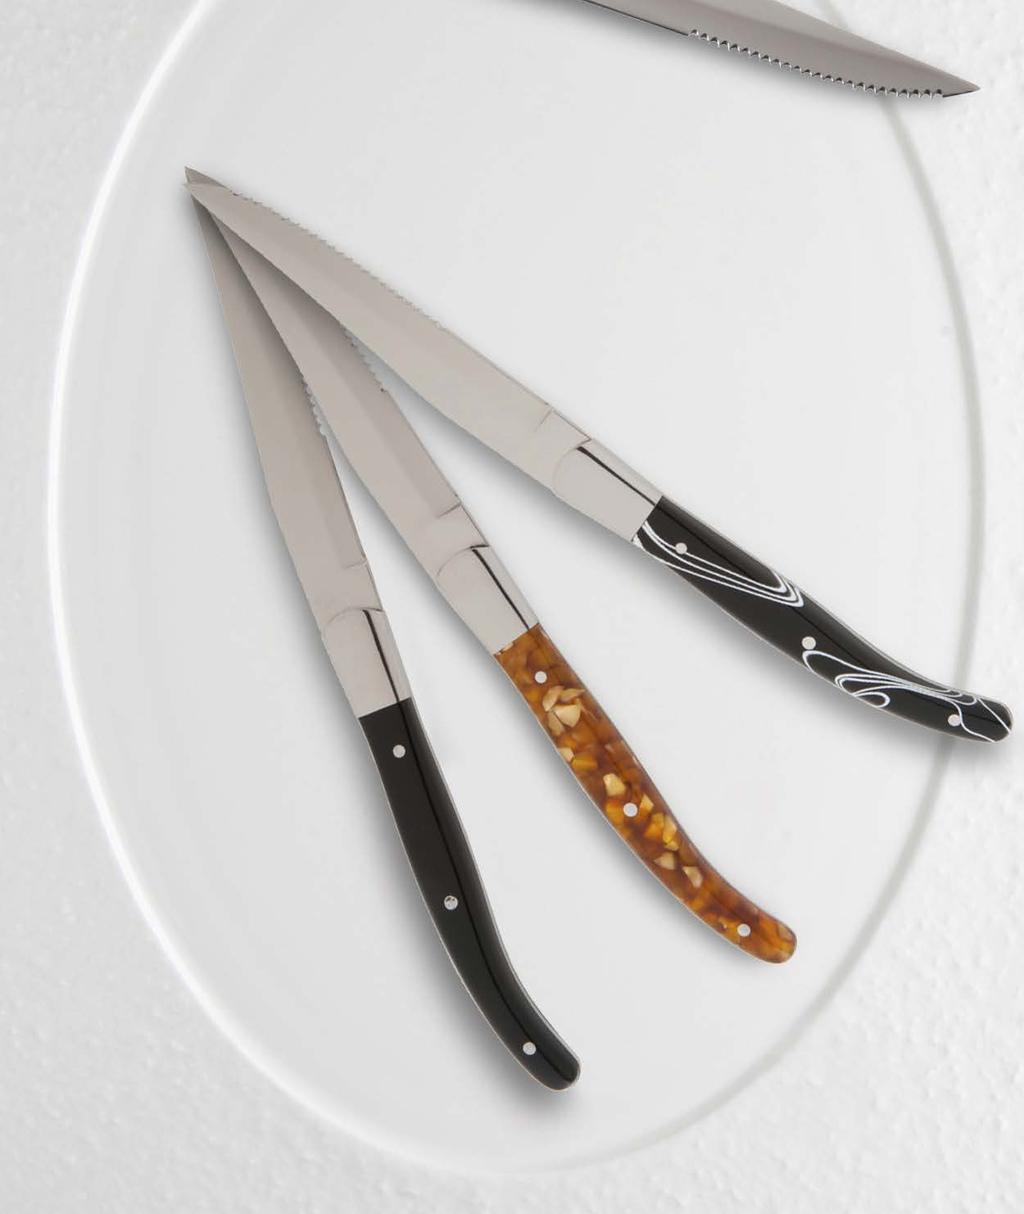 PROVENCAL STEAK KNIVES 26 18/10 Stainless Steel 27 Resin Handles COMMERCIAL Mirror Polished Blades